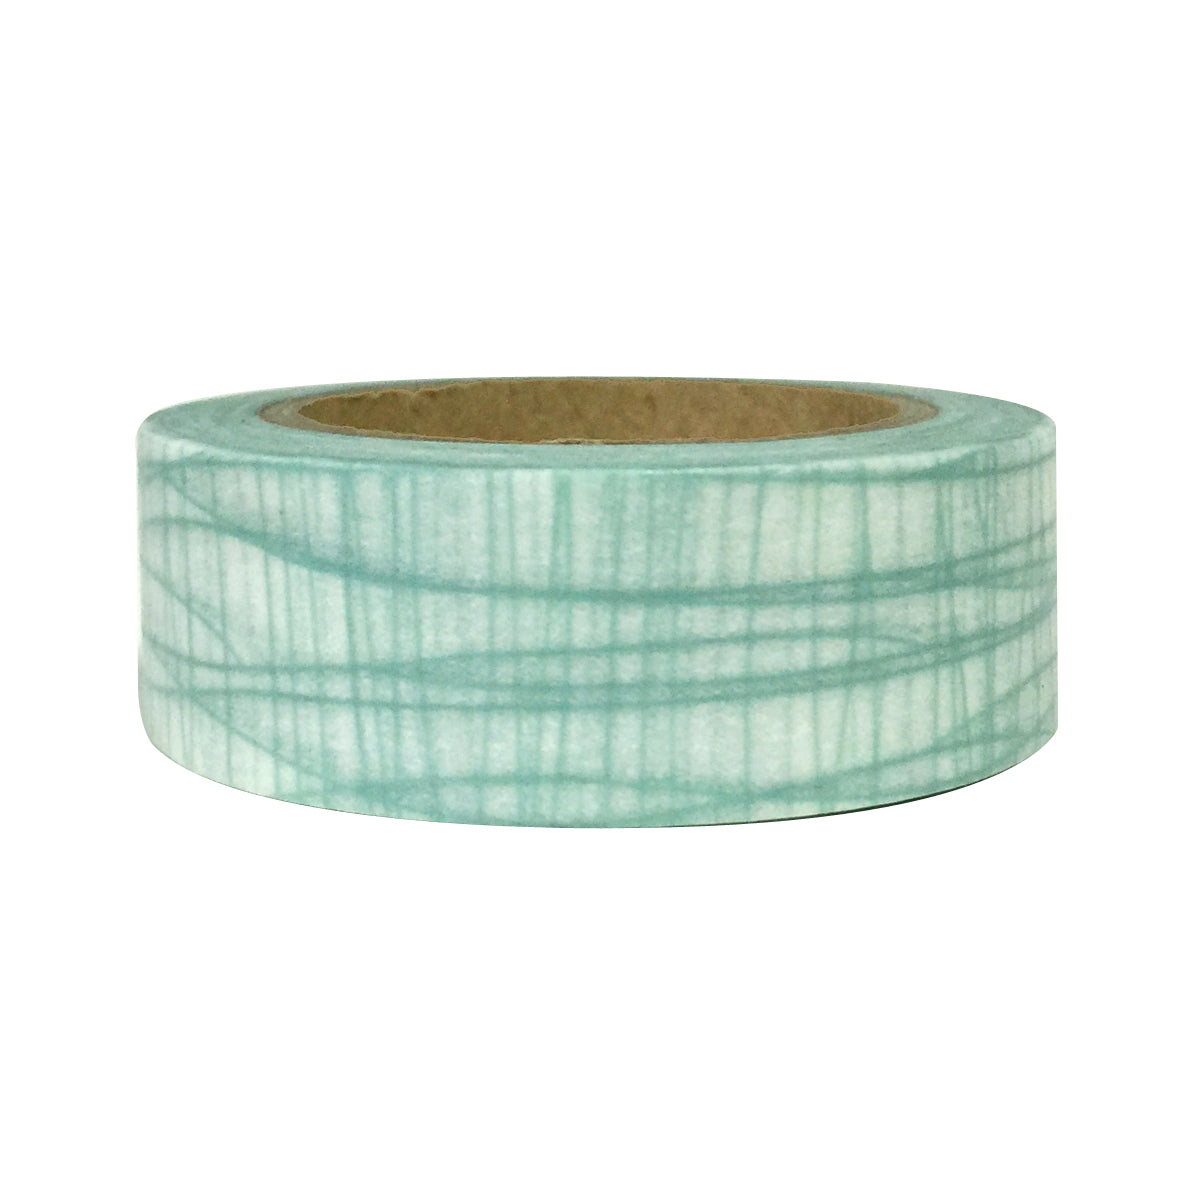 Wrapables Washi Masking Tape, Cute and Colorful Group